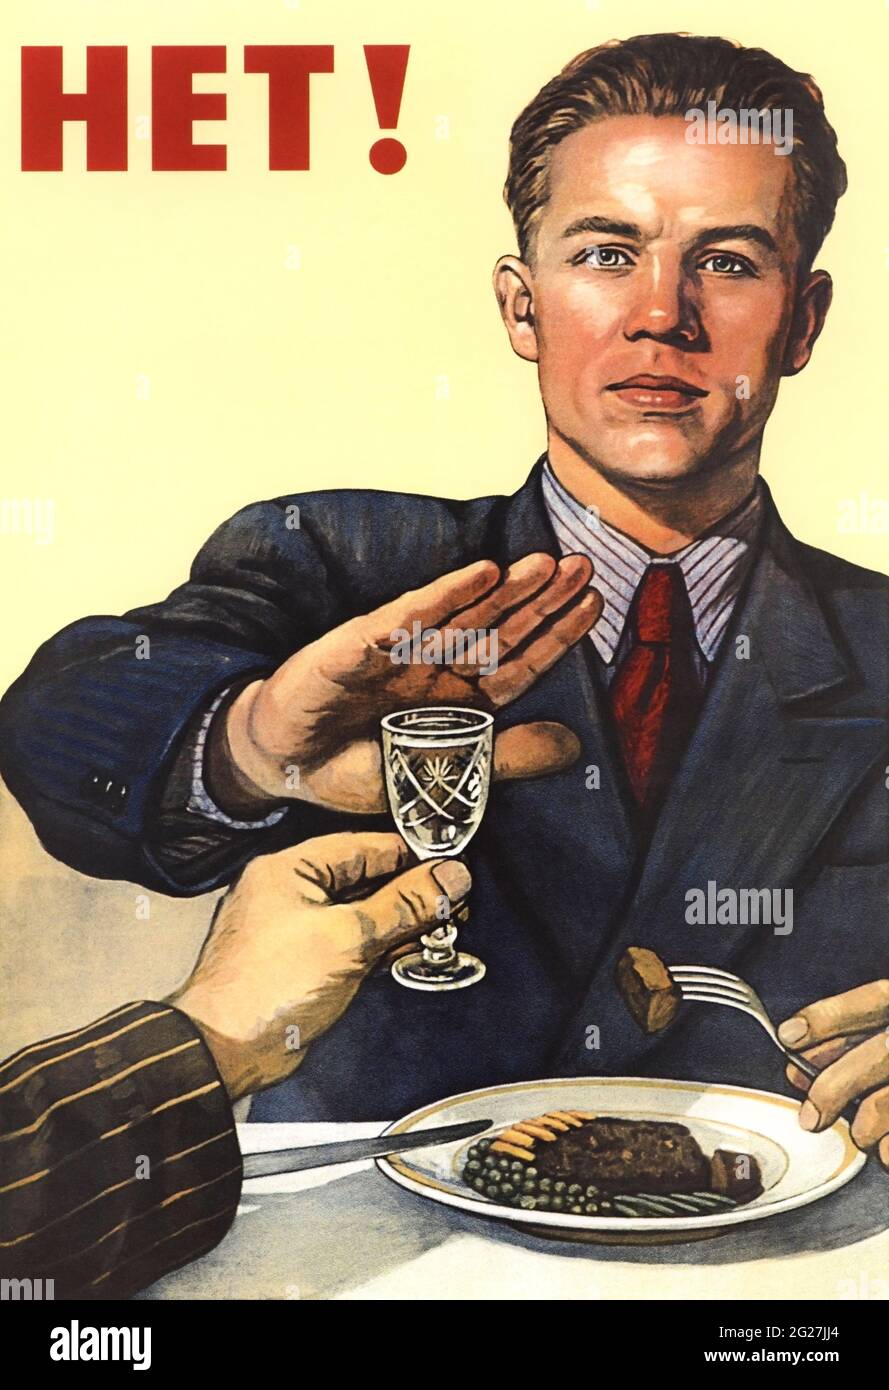 Soviet Union history print of a man refusing a drink, related to anti-alcohol propaganda. Stock Photo